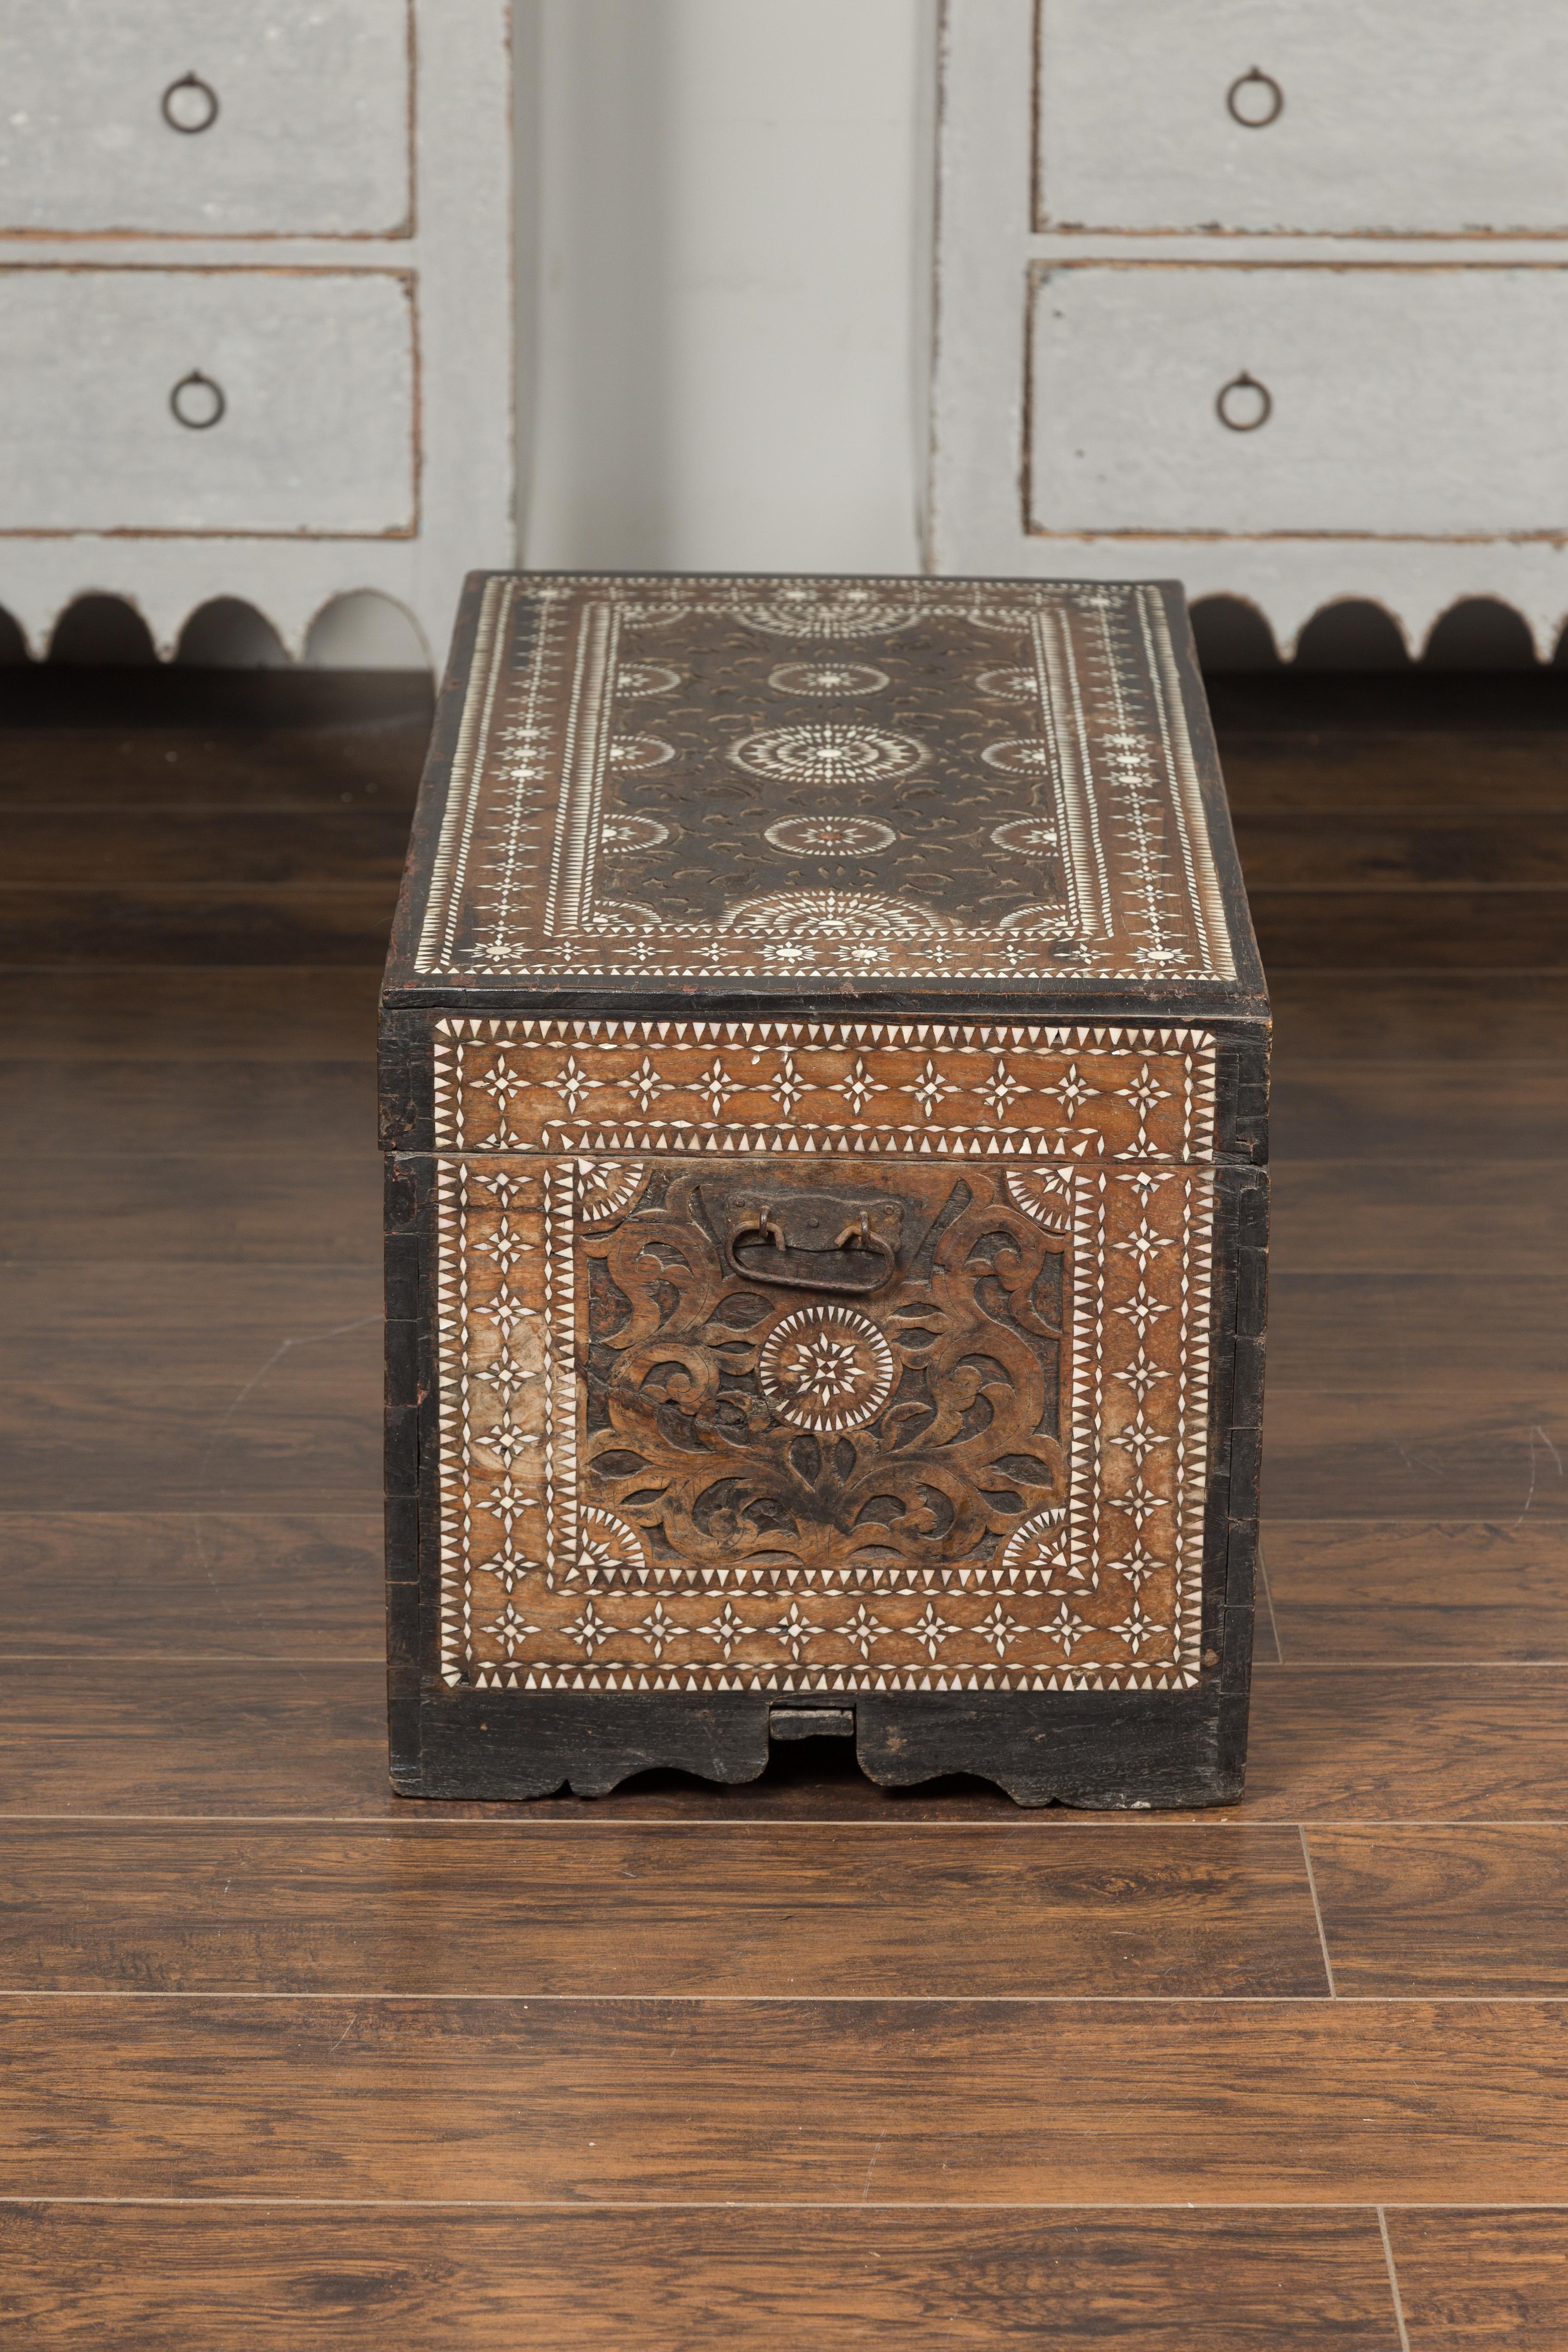 Moorish Style 1920s Blanket Chest with Geometric Mother of Pearl Inlaid Decor 8